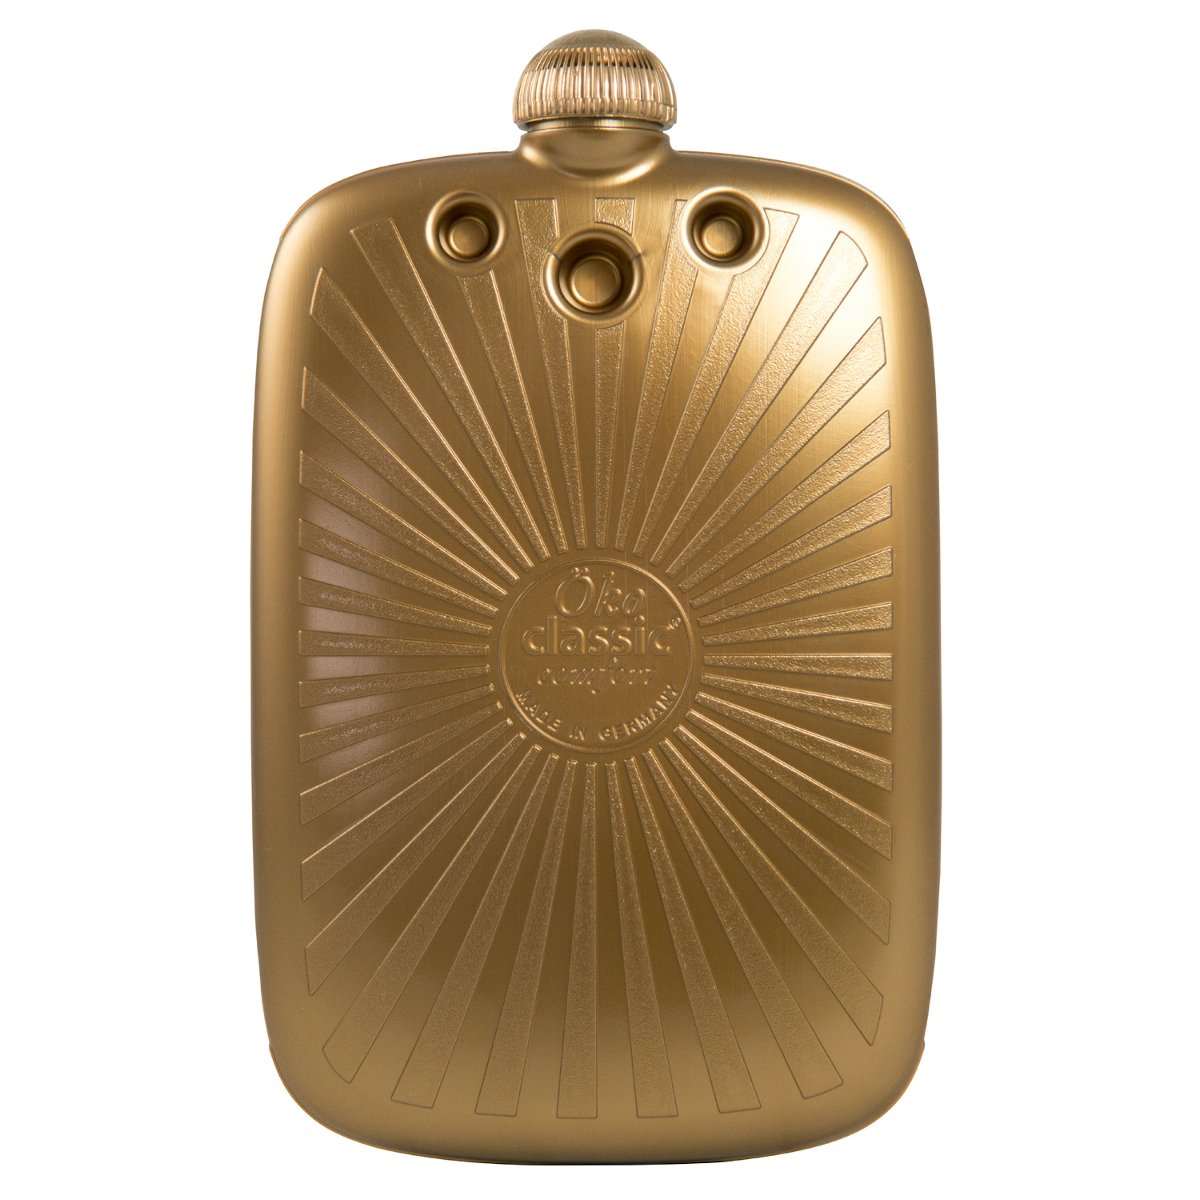 https://cdn.shopify.com/s/files/1/0455/1285/1621/products/Eco_HOt_Water_Bottle_Gold_1200_1200_1600x.jpg?v=1599840740